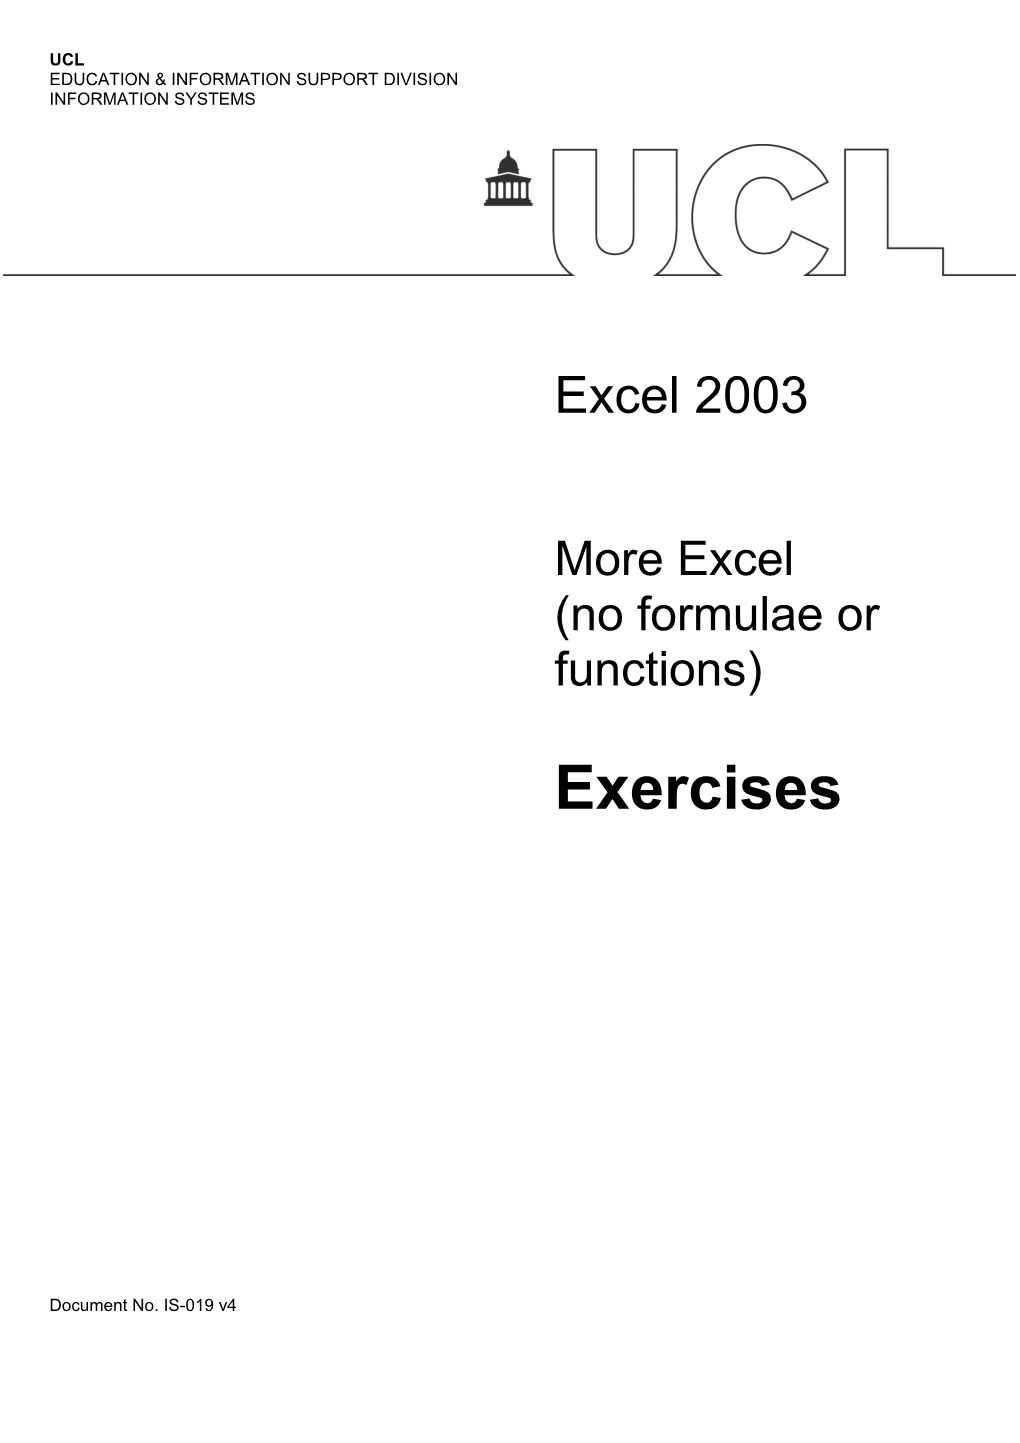 More Excel (No Formulae Or Functions) Exercises